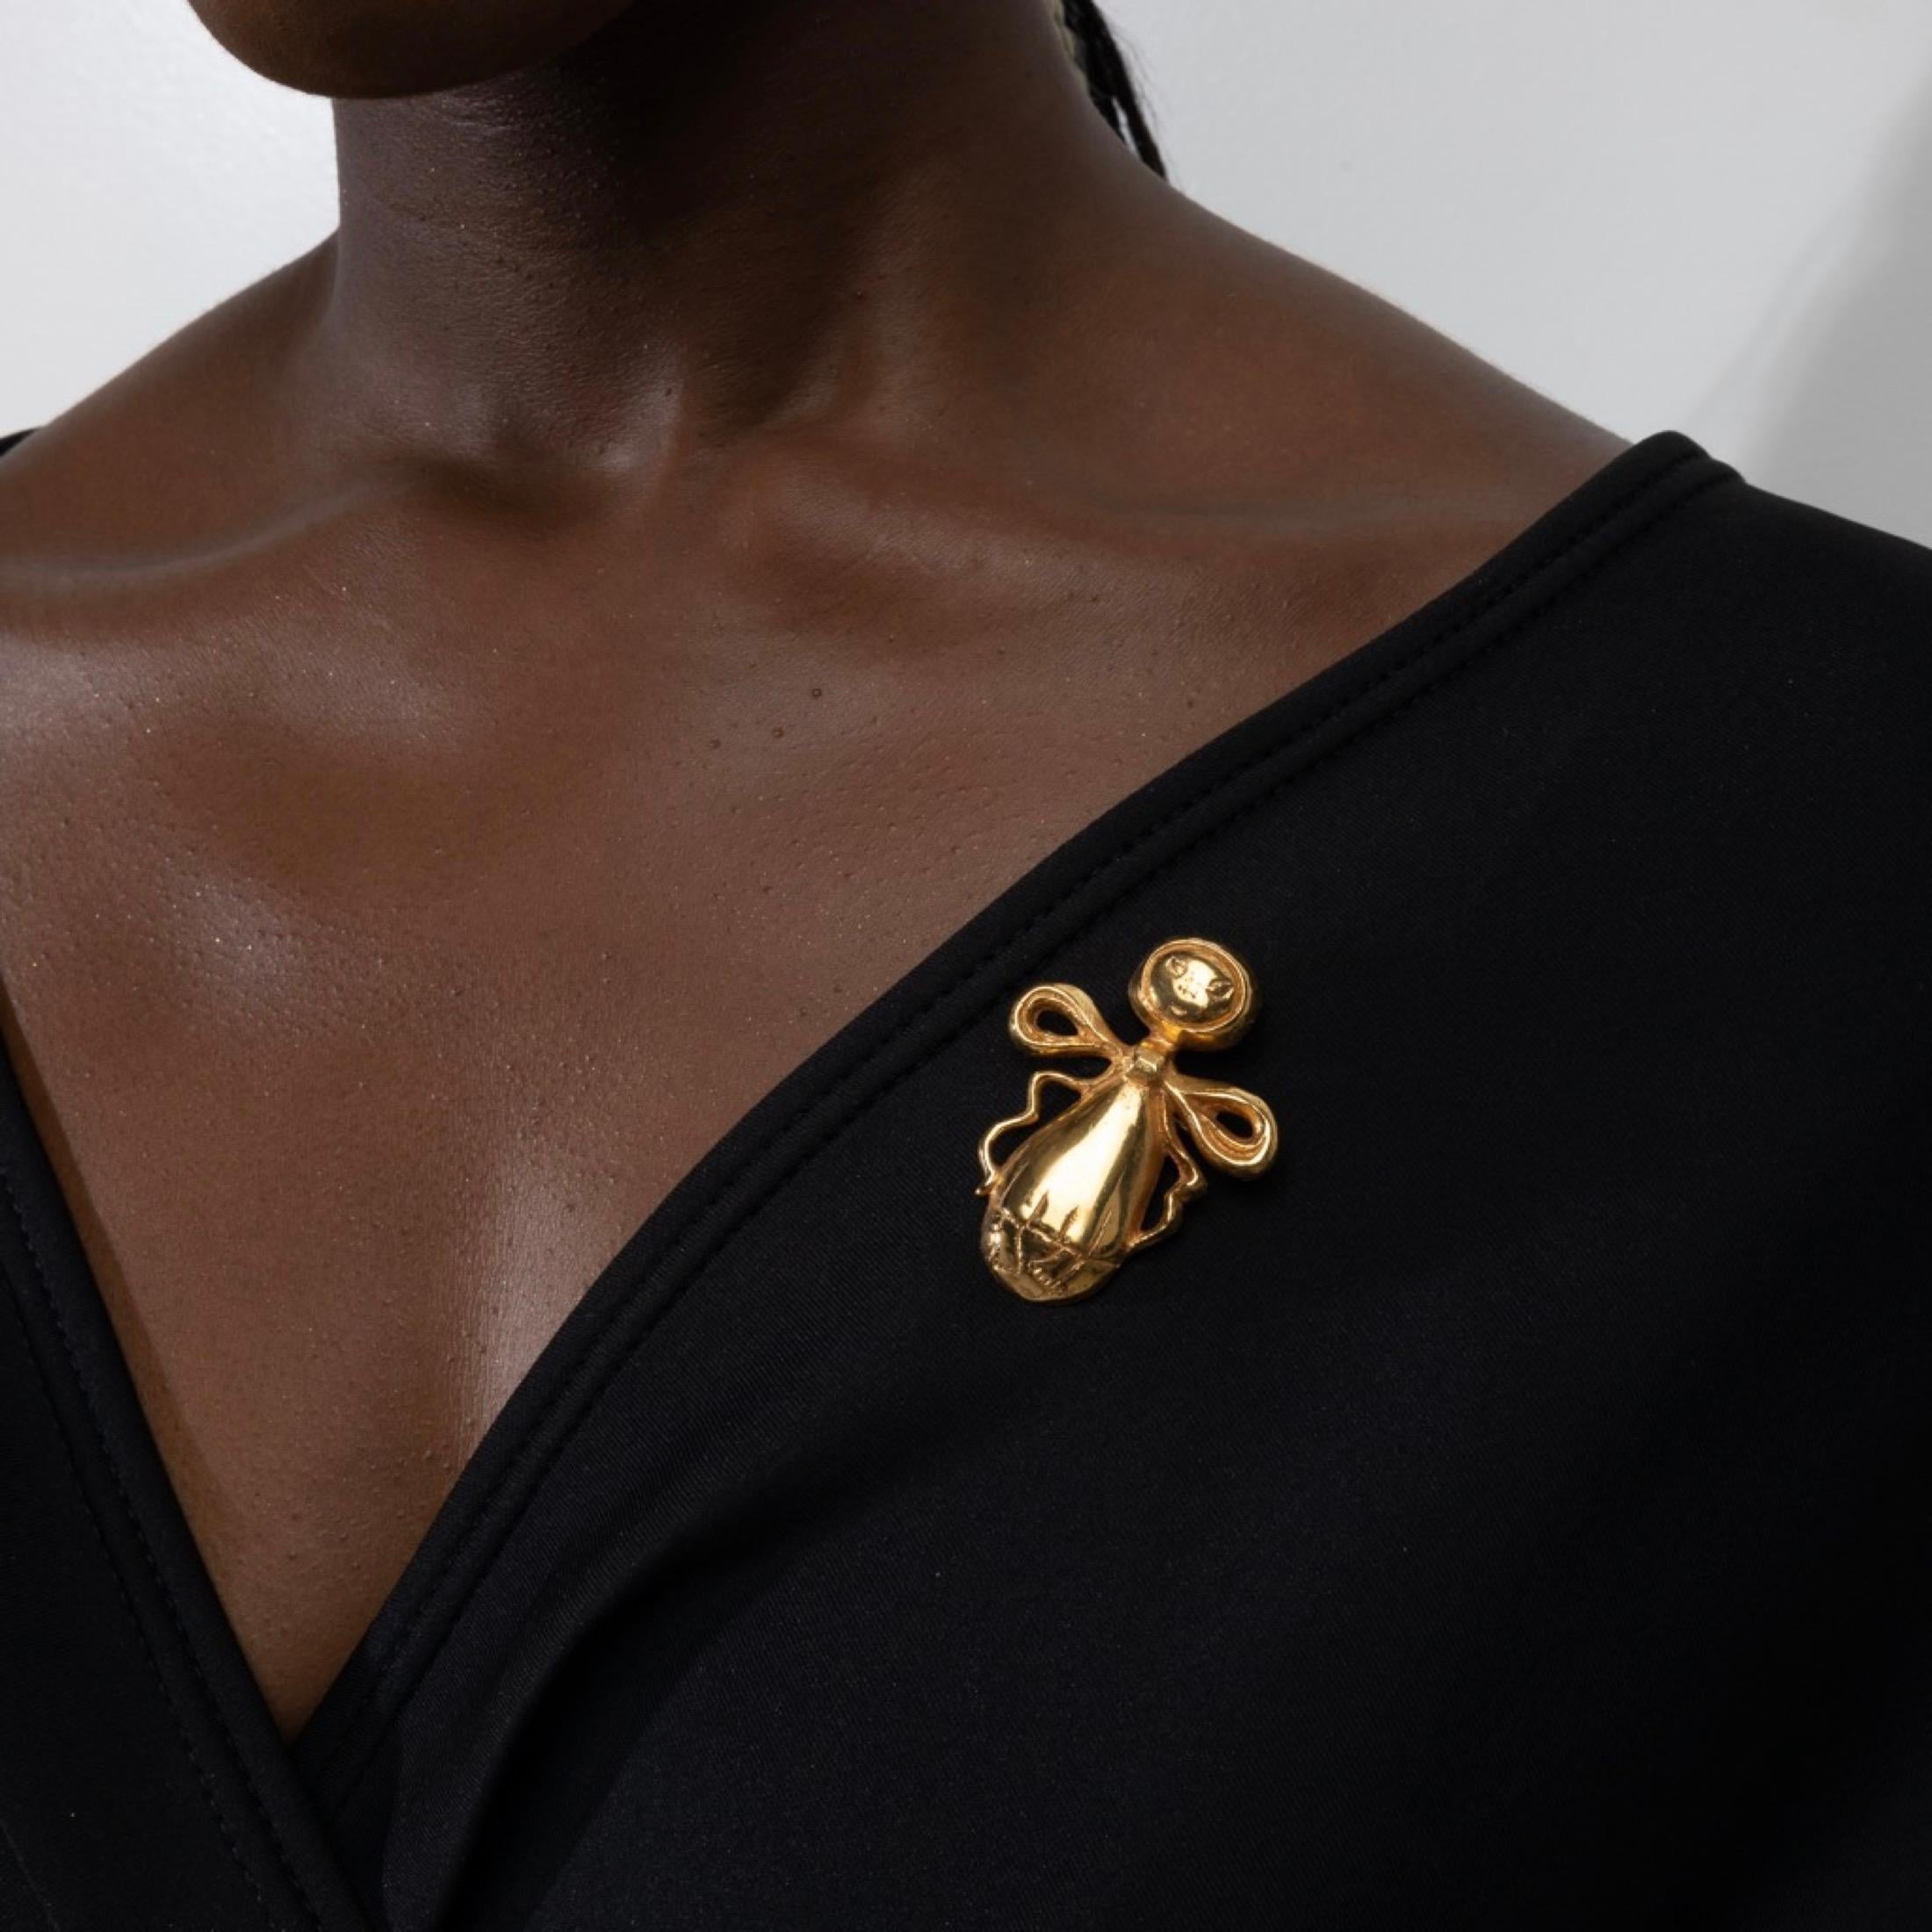 About L'abeille hybride (The hybrid bee) by Line Vautrin
The hybrid bee represents an imaginary character between a bee and a human.
We present here the version mounted on a brooch, in gilded bronze.
Signed by stamping LINE VAUTRIN
CR. : Very